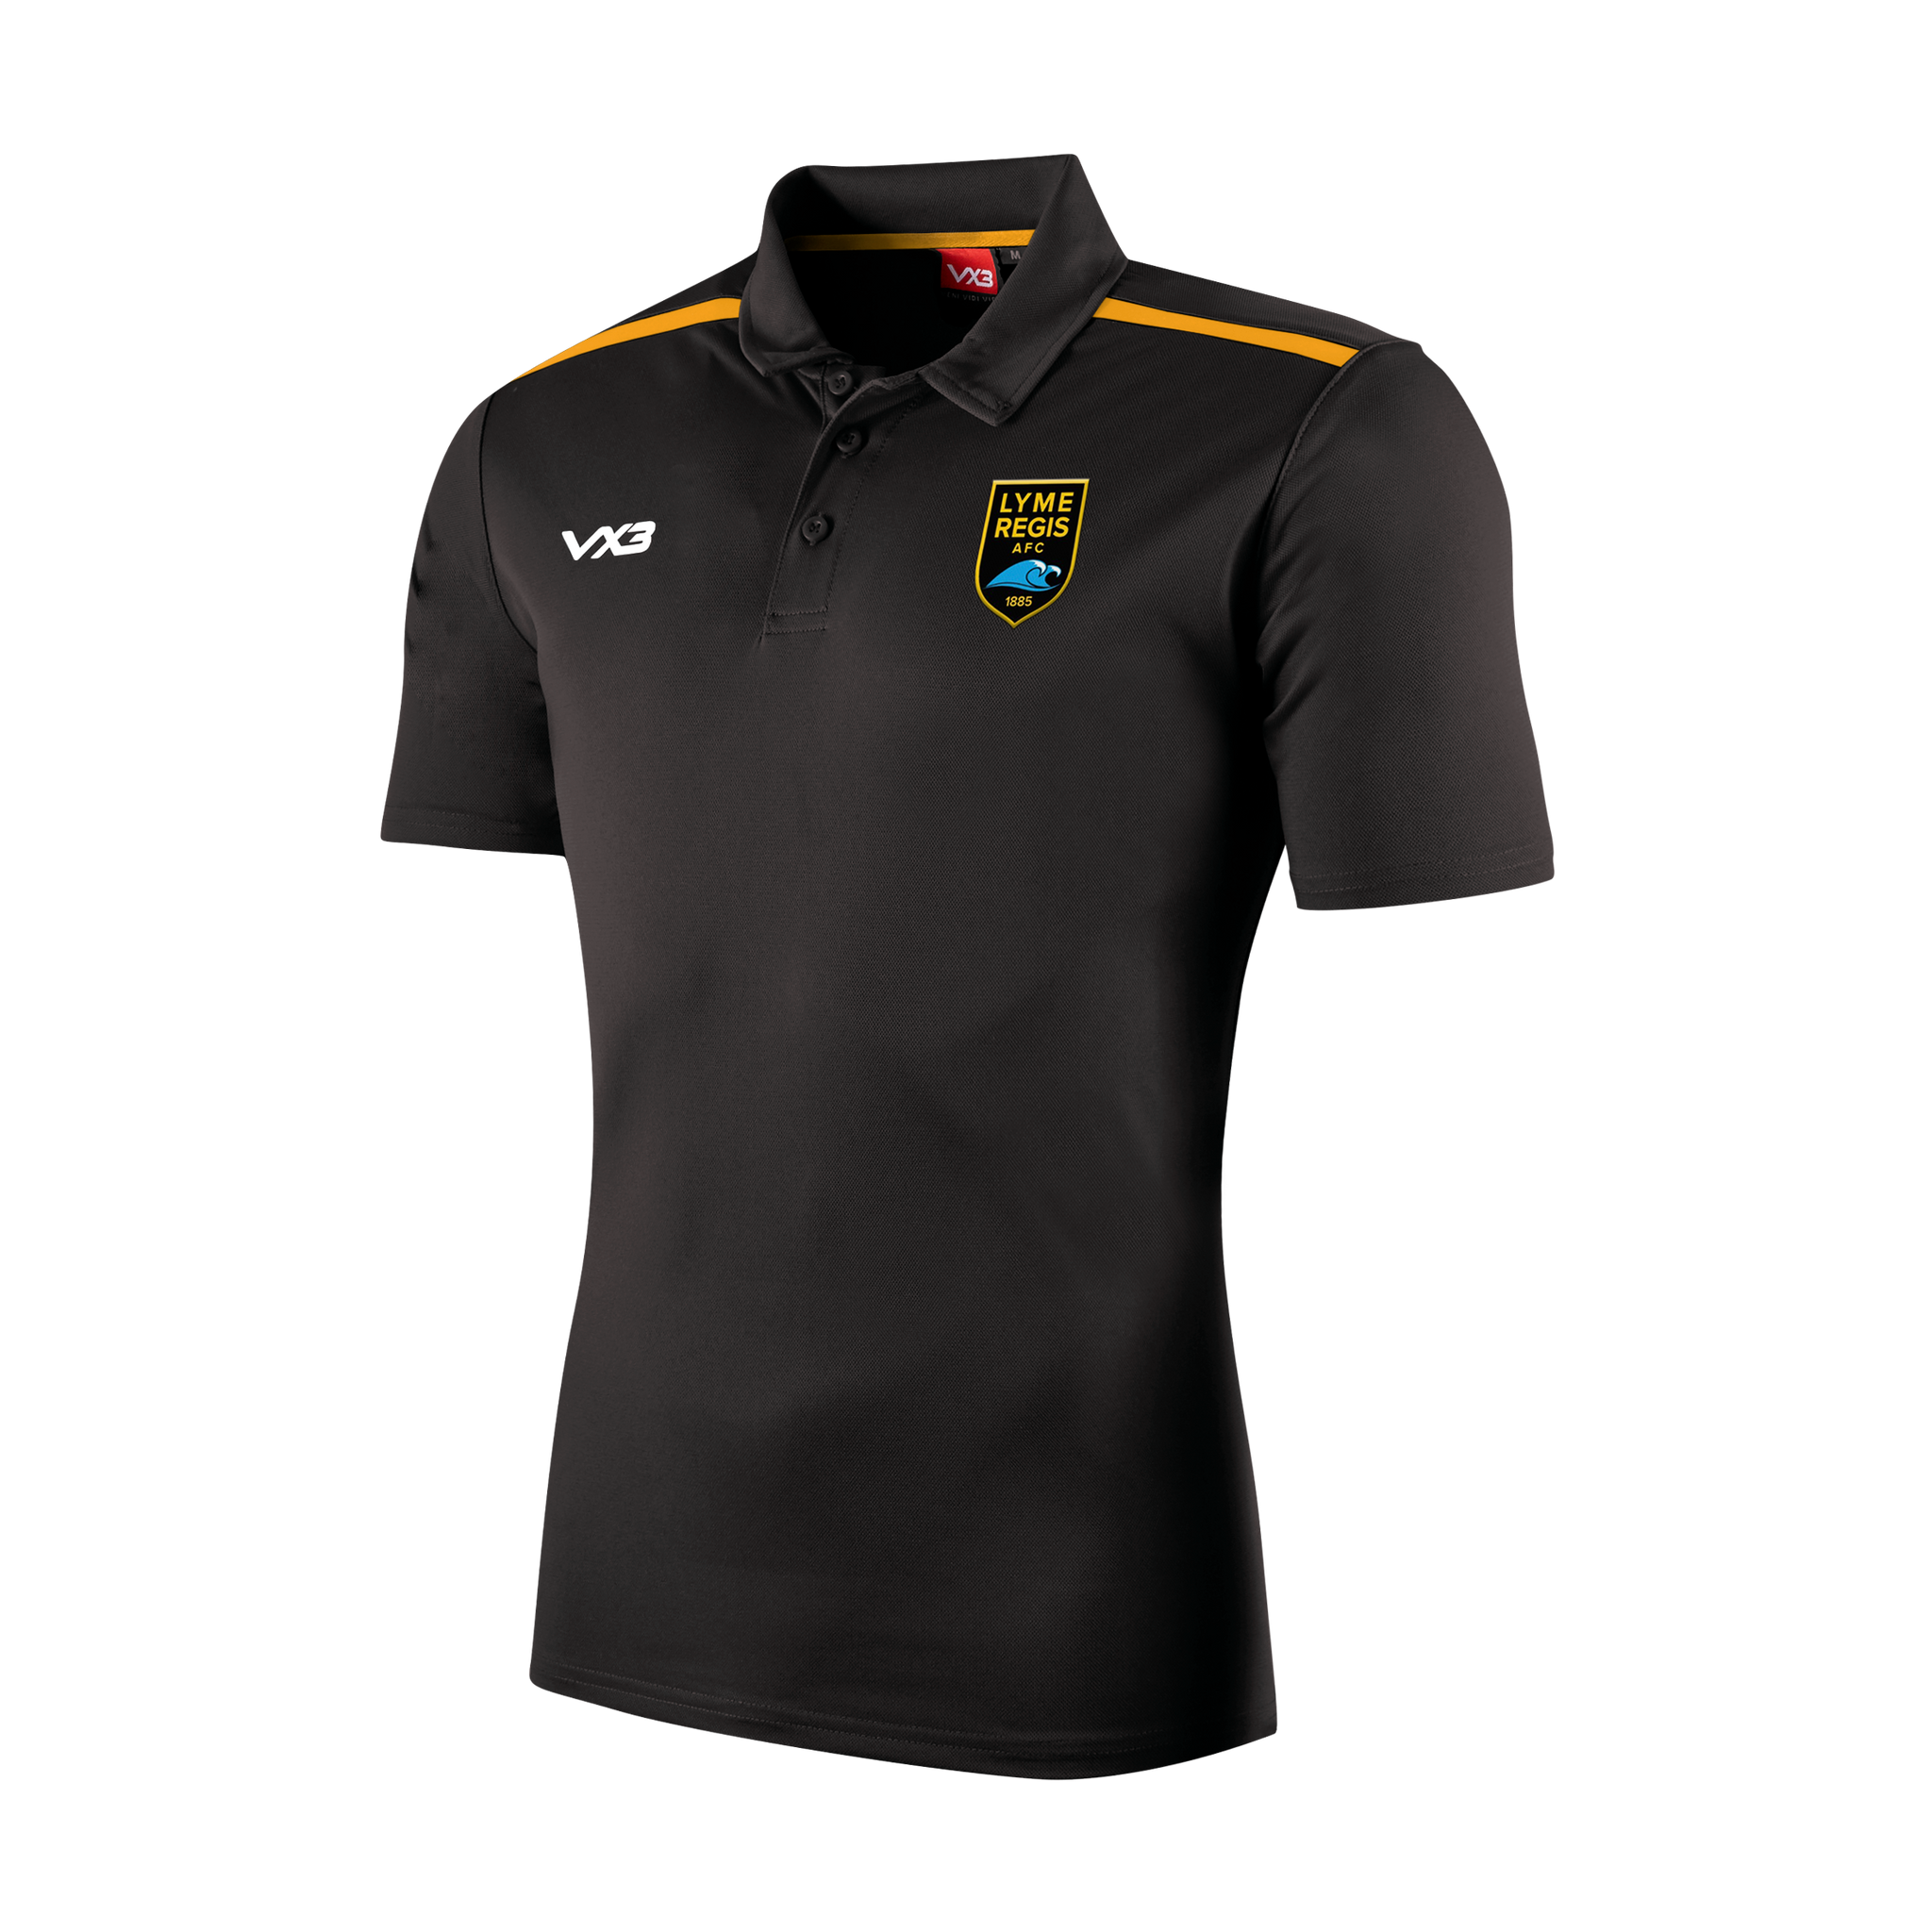 Lyme Regis F.C. Fortis Youth Polo